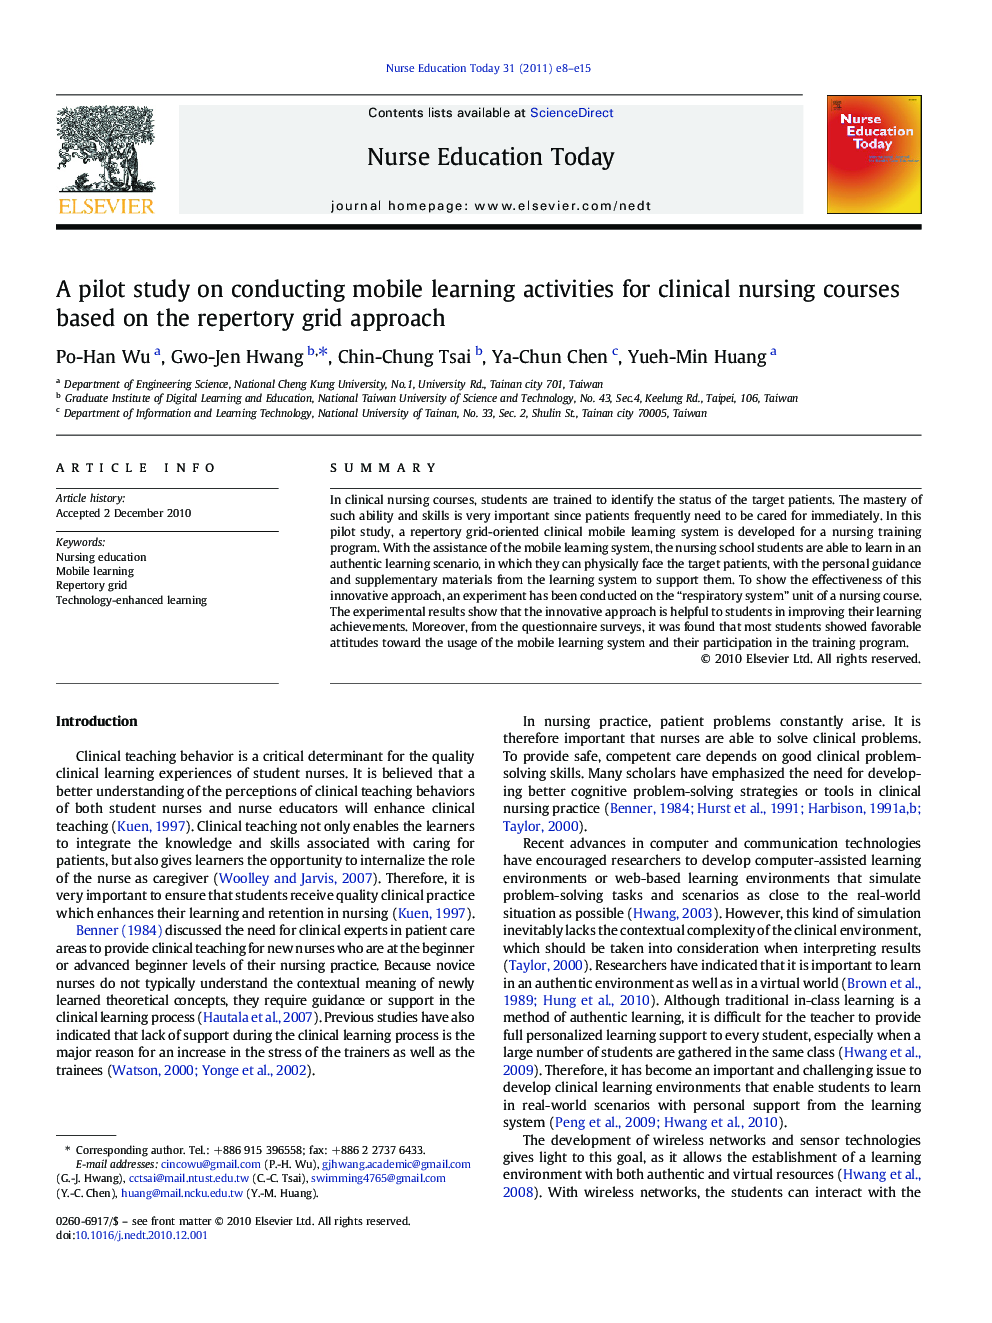 A pilot study on conducting mobile learning activities for clinical nursing courses based on the repertory grid approach